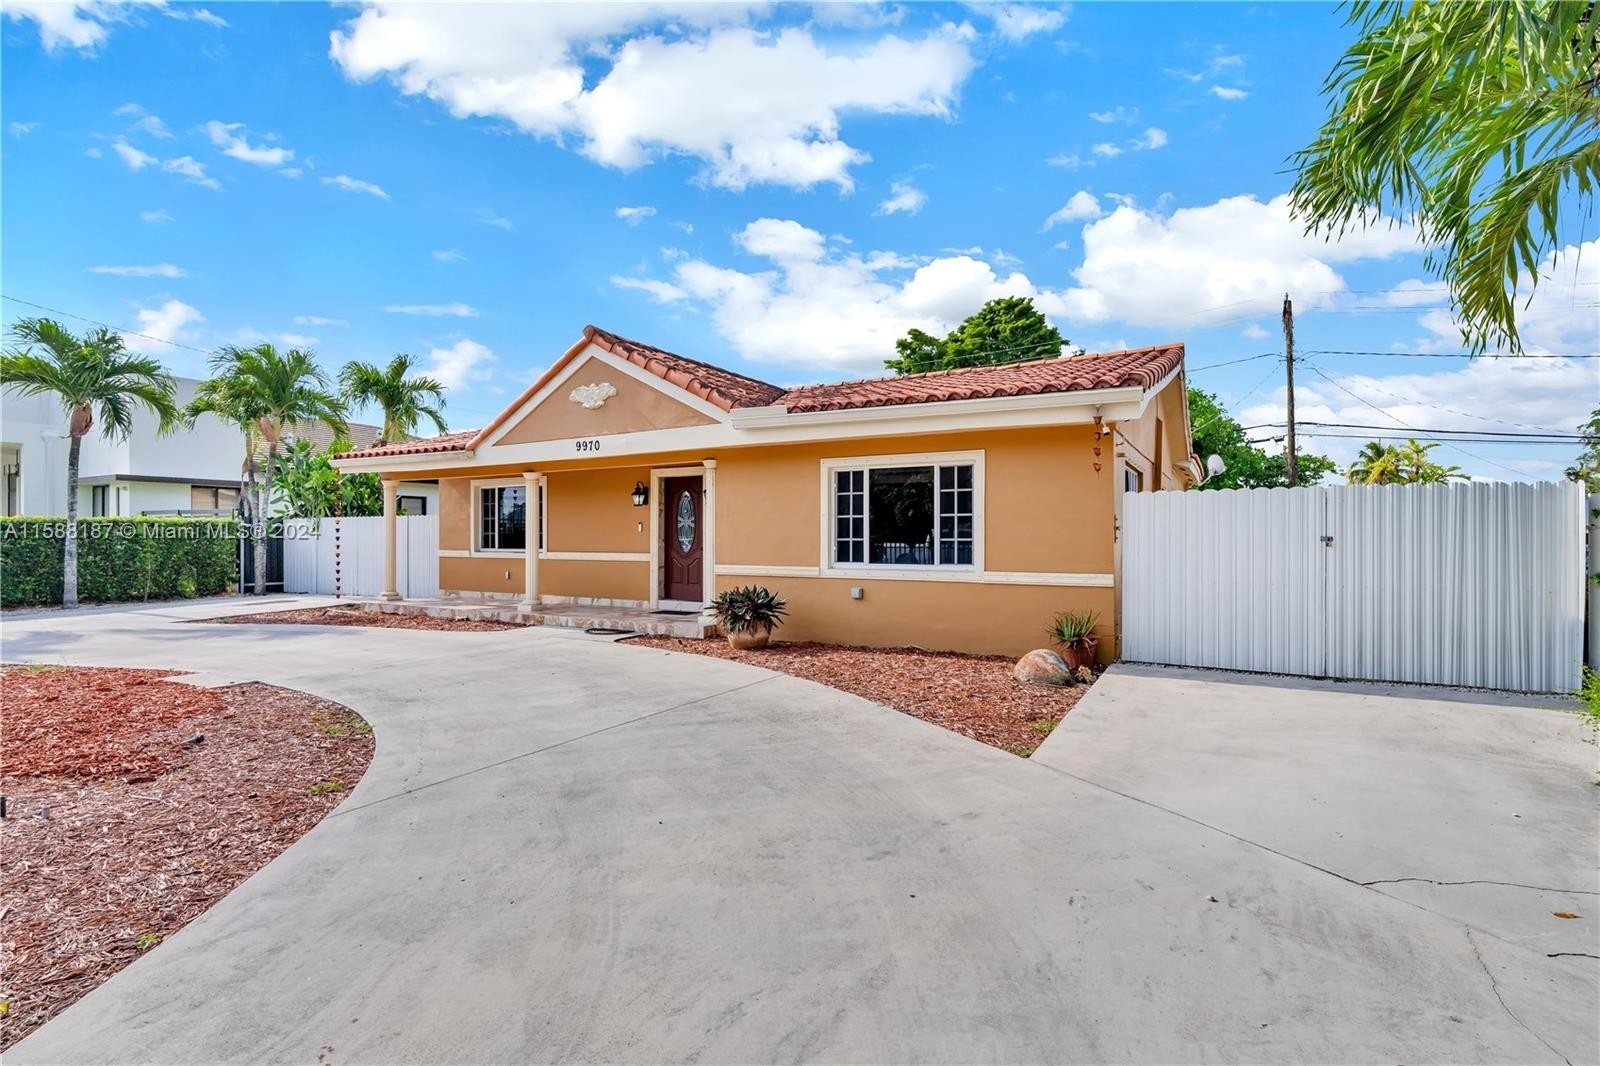 37. 9970 SW 42nd Ter